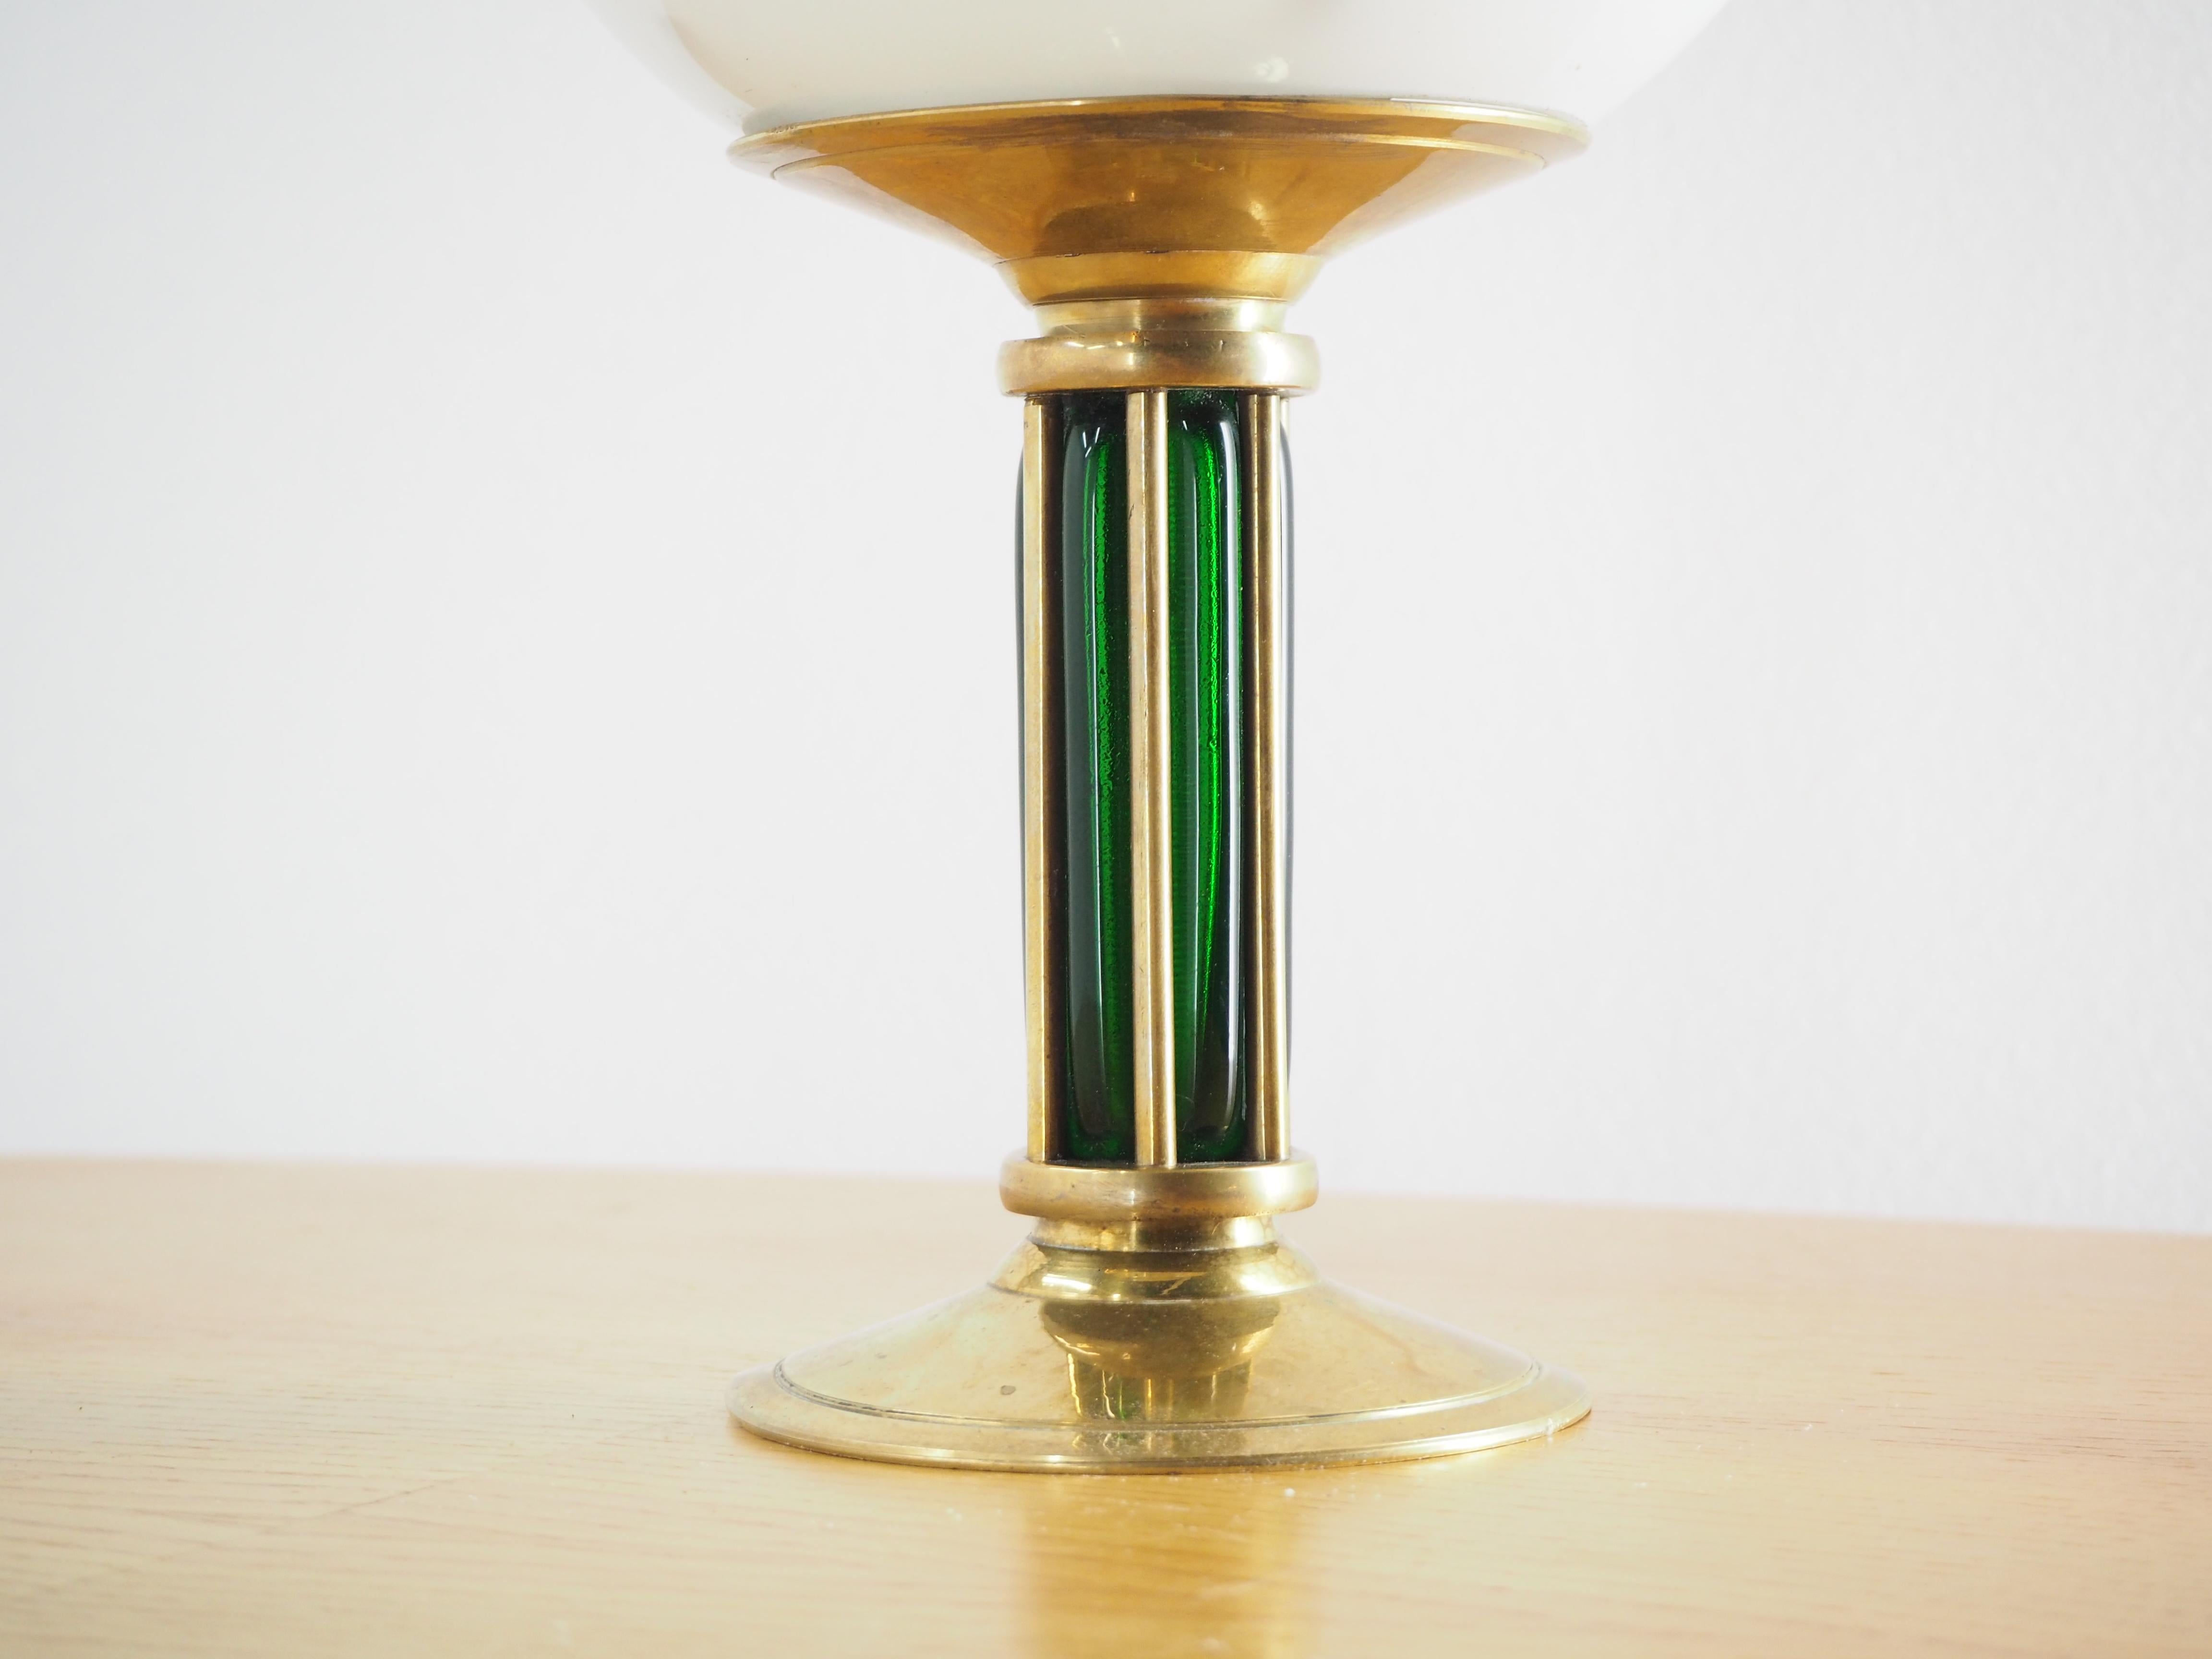 - In original condition
- New electric cable
- All functional
- Art Deco table lamp
- Brass and green glass
- Cable is 85cm long.
   